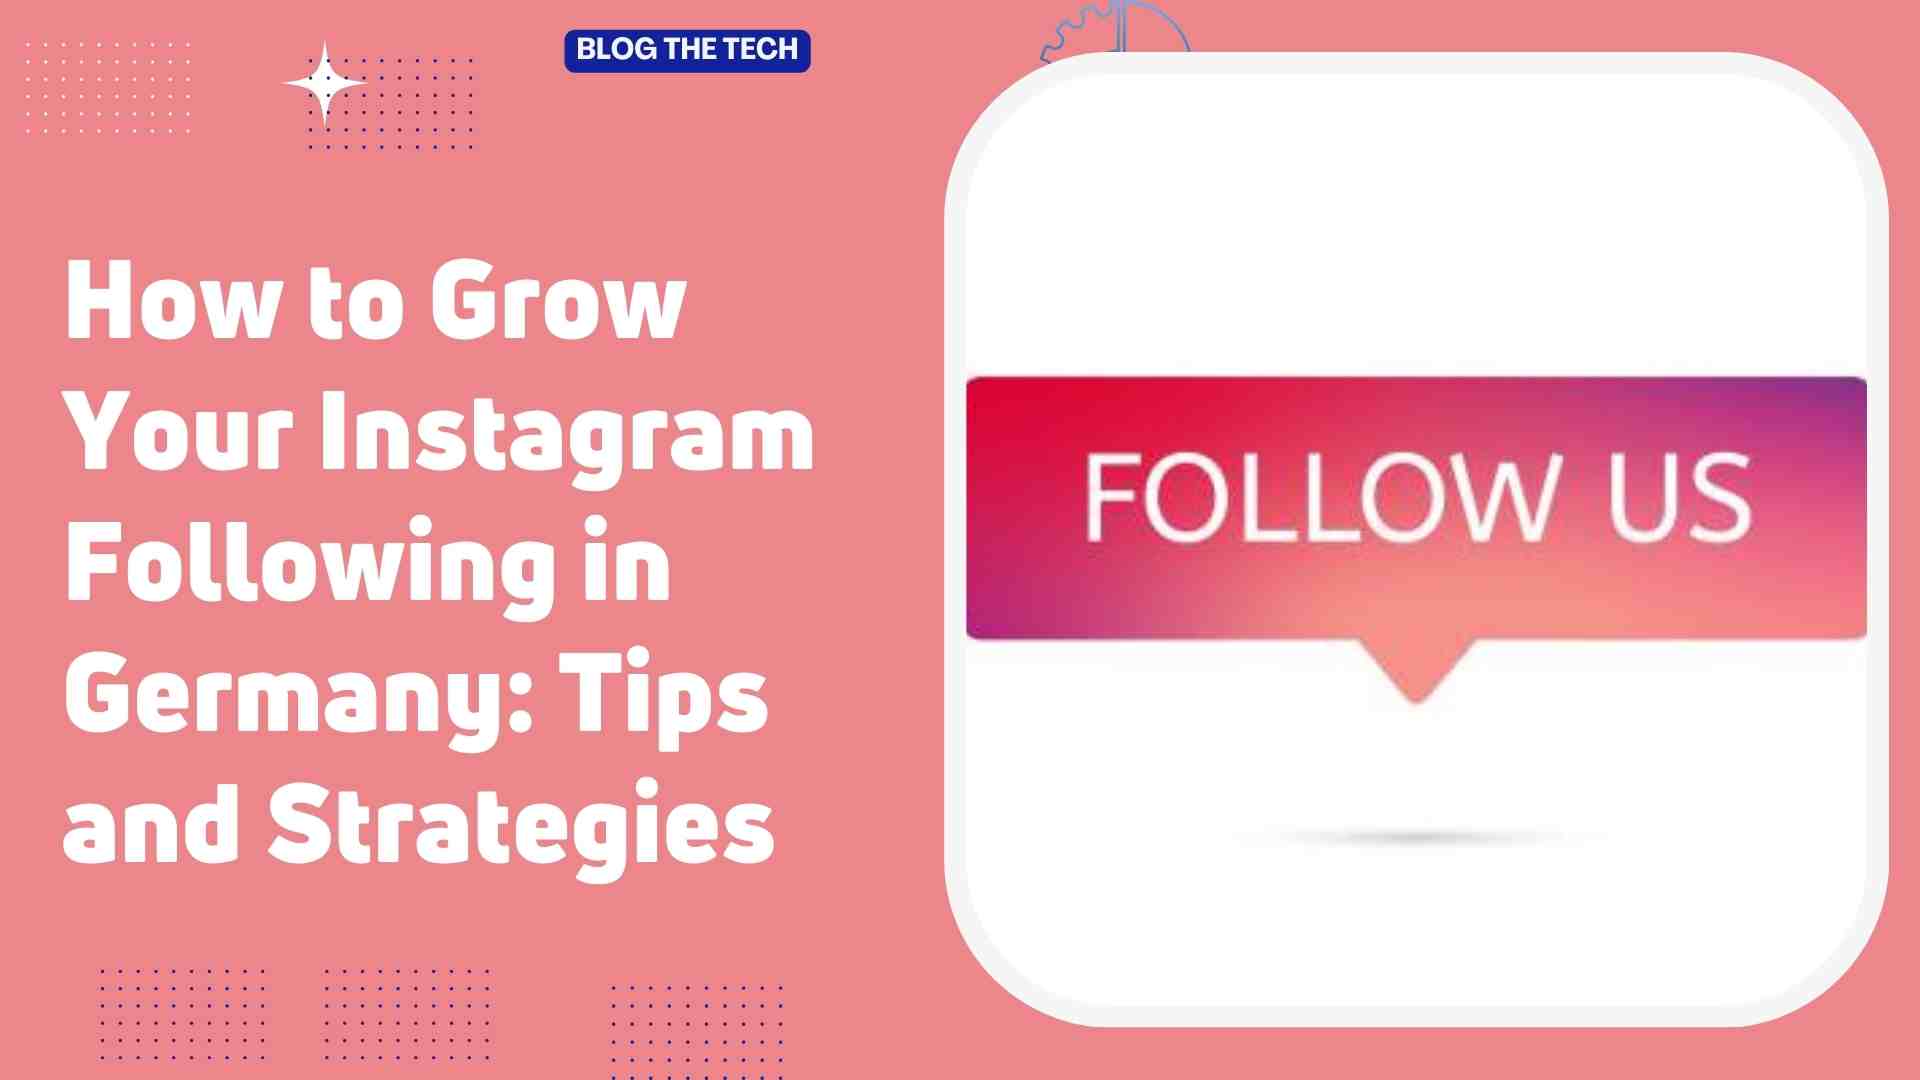 How to Grow Your Instagram Following in Germany: Tips and Strategies